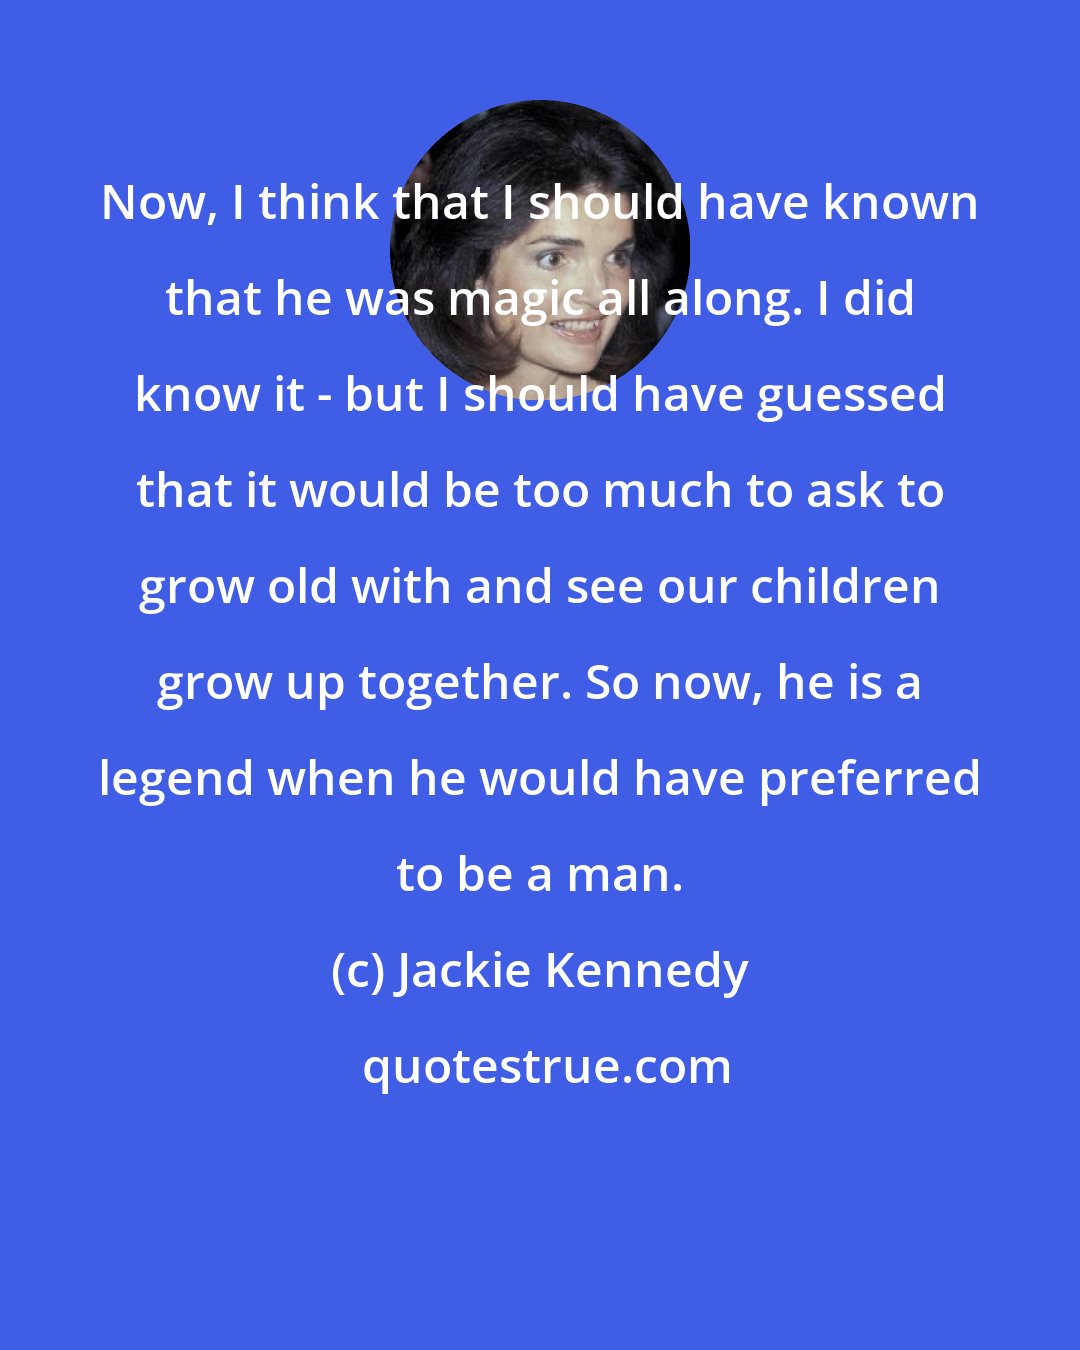 Jackie Kennedy: Now, I think that I should have known that he was magic all along. I did know it - but I should have guessed that it would be too much to ask to grow old with and see our children grow up together. So now, he is a legend when he would have preferred to be a man.